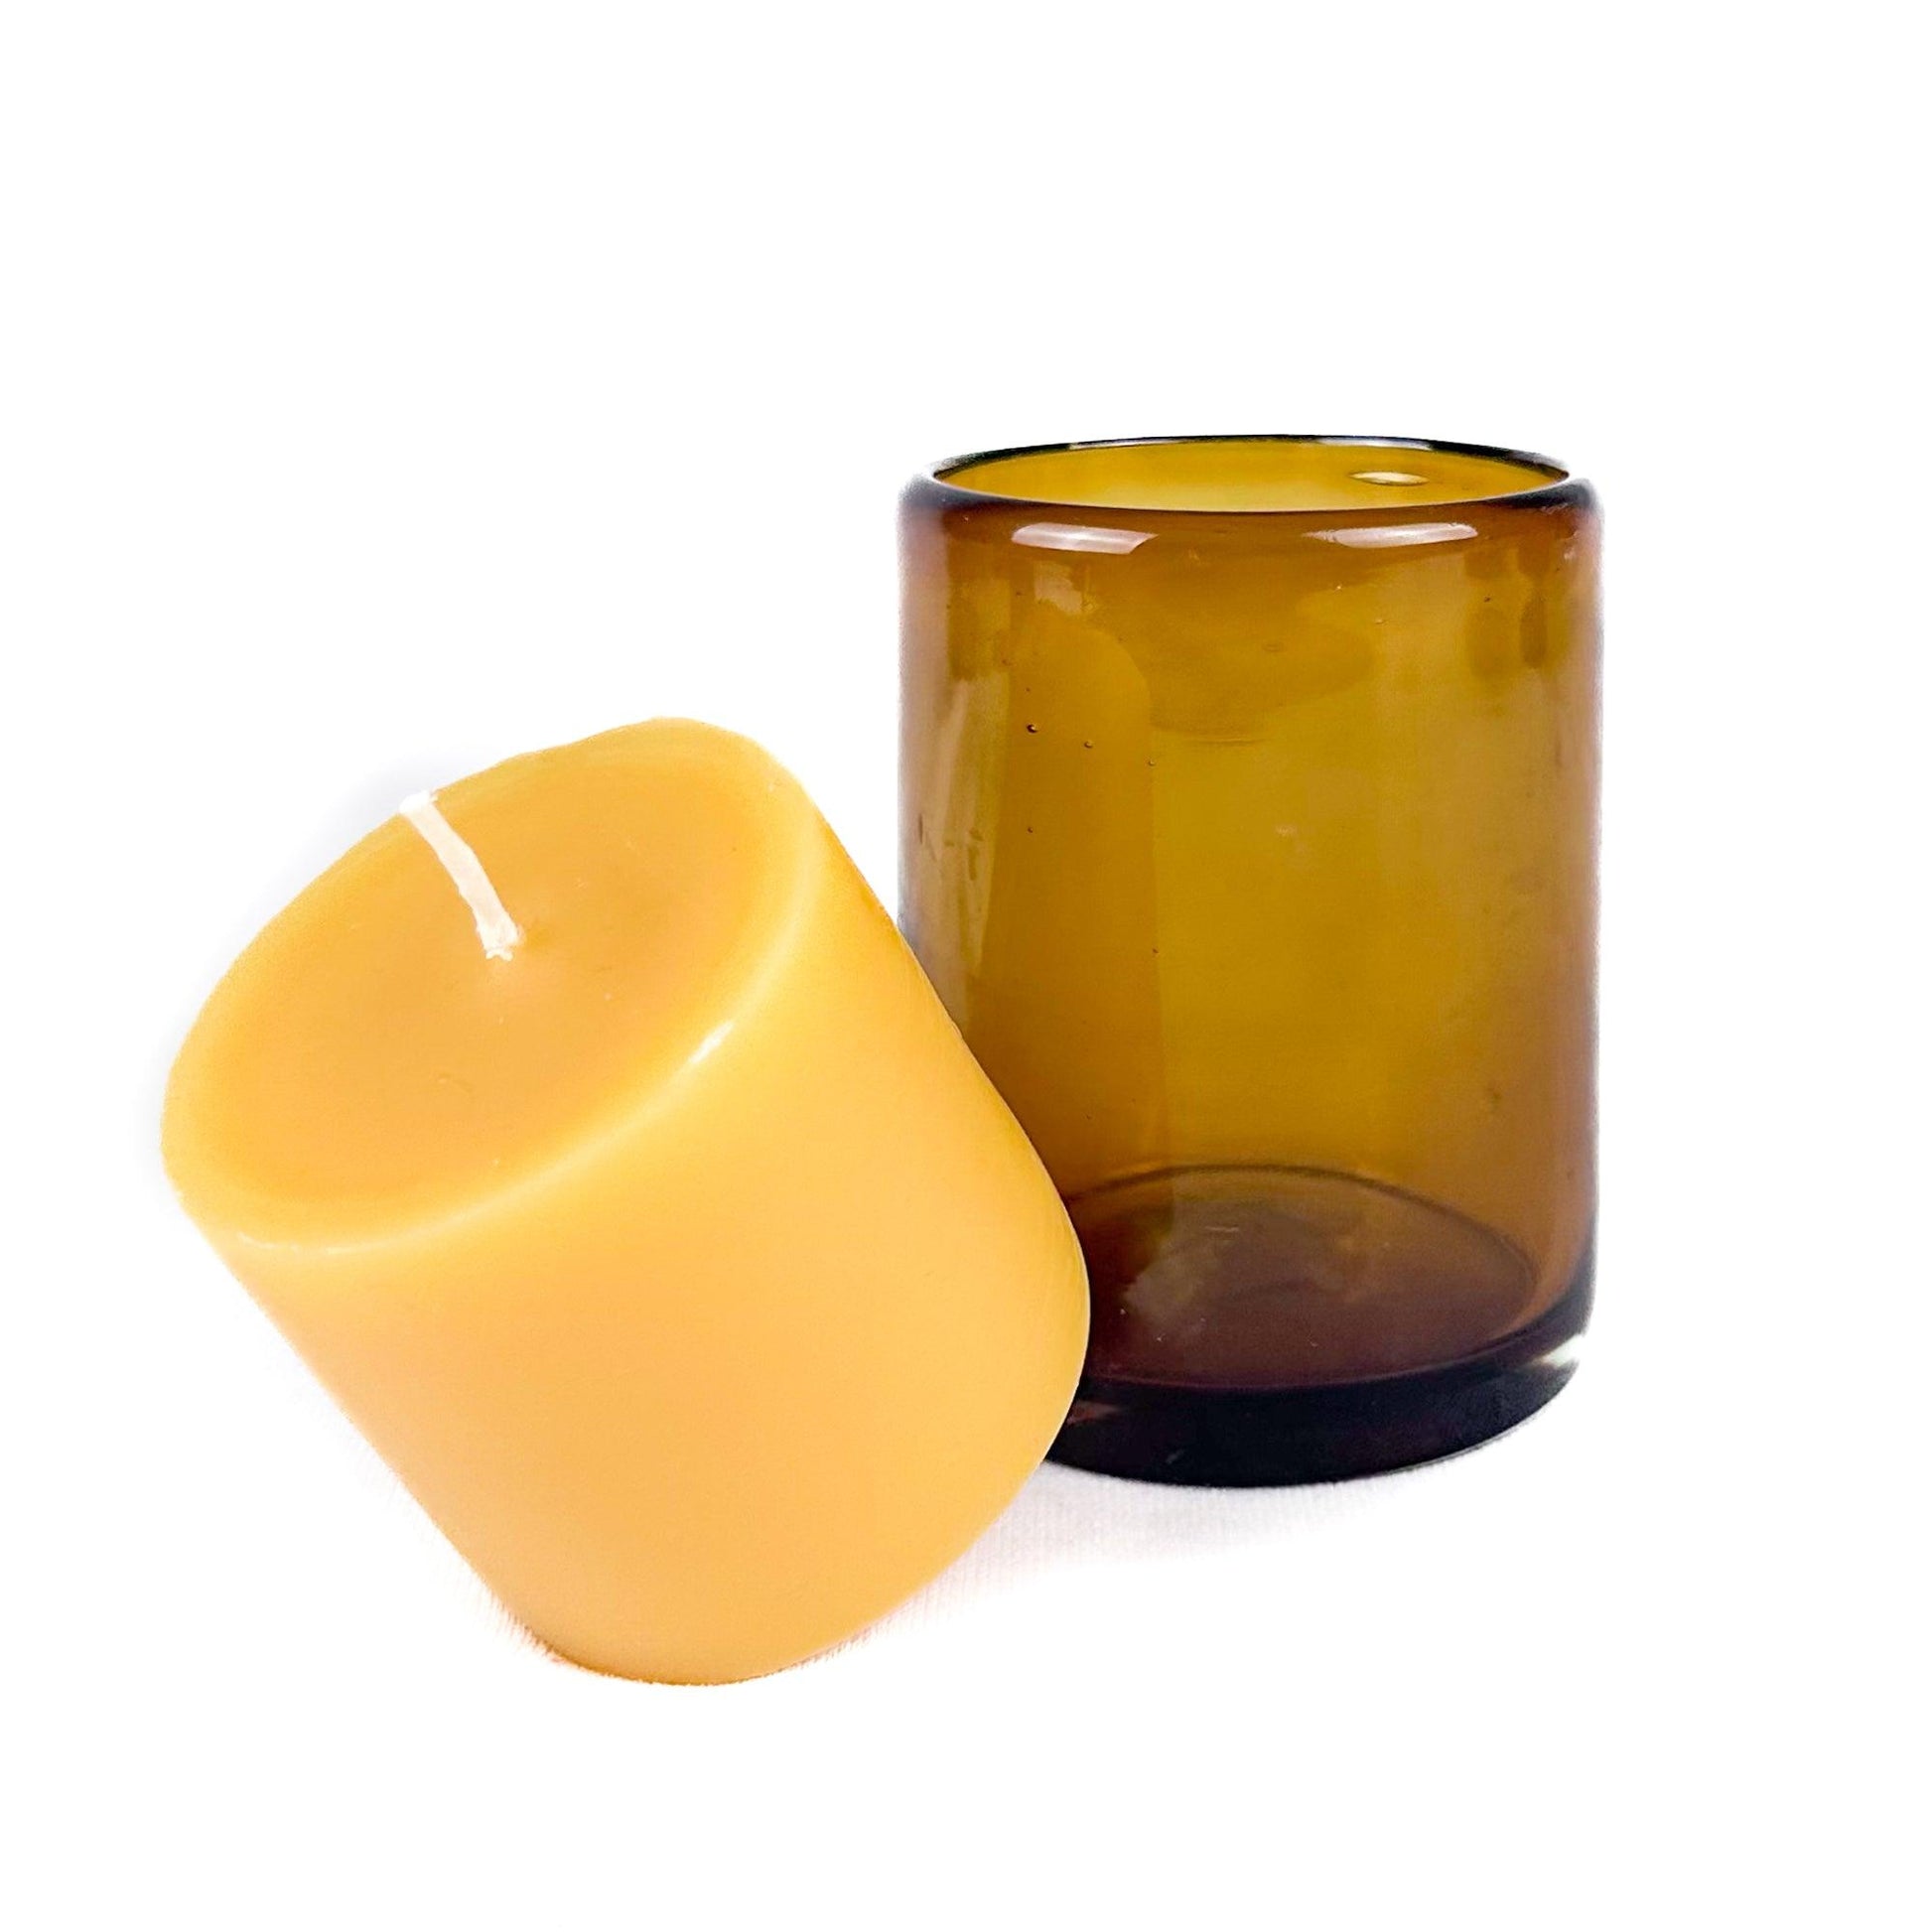 Botanica Beeswax Candle in Blown Glass Cypress - Sandalwood / 8 oz